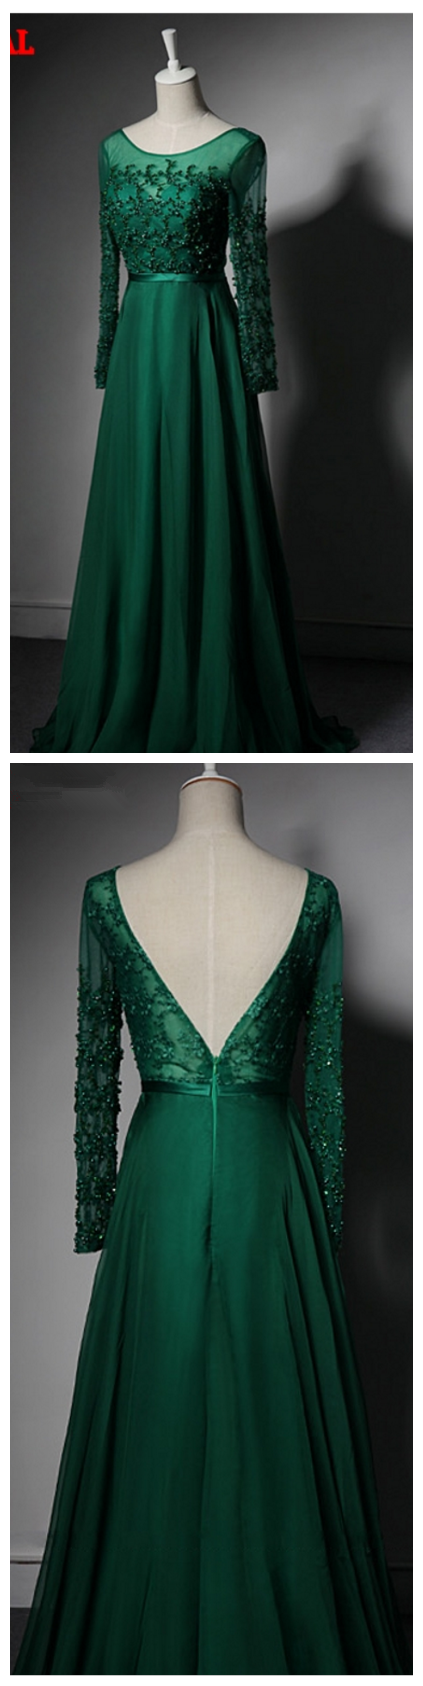 Green Long Sleeve Evening Dresses ,party Beautiful Crystal Beaded Women Prom Formal Evening Gowns Dresses